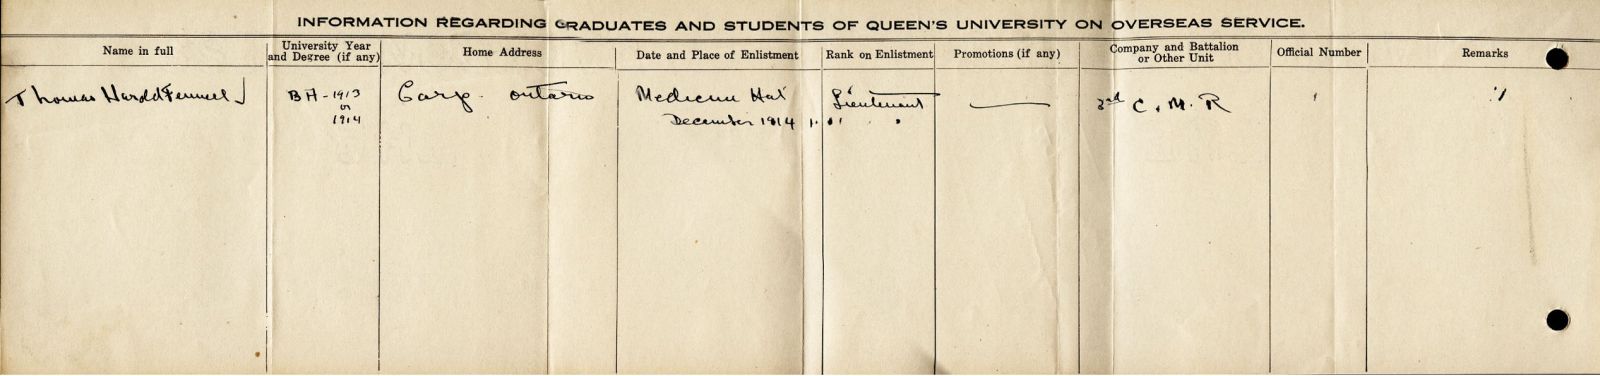 University Overseas Service Record of Fennell